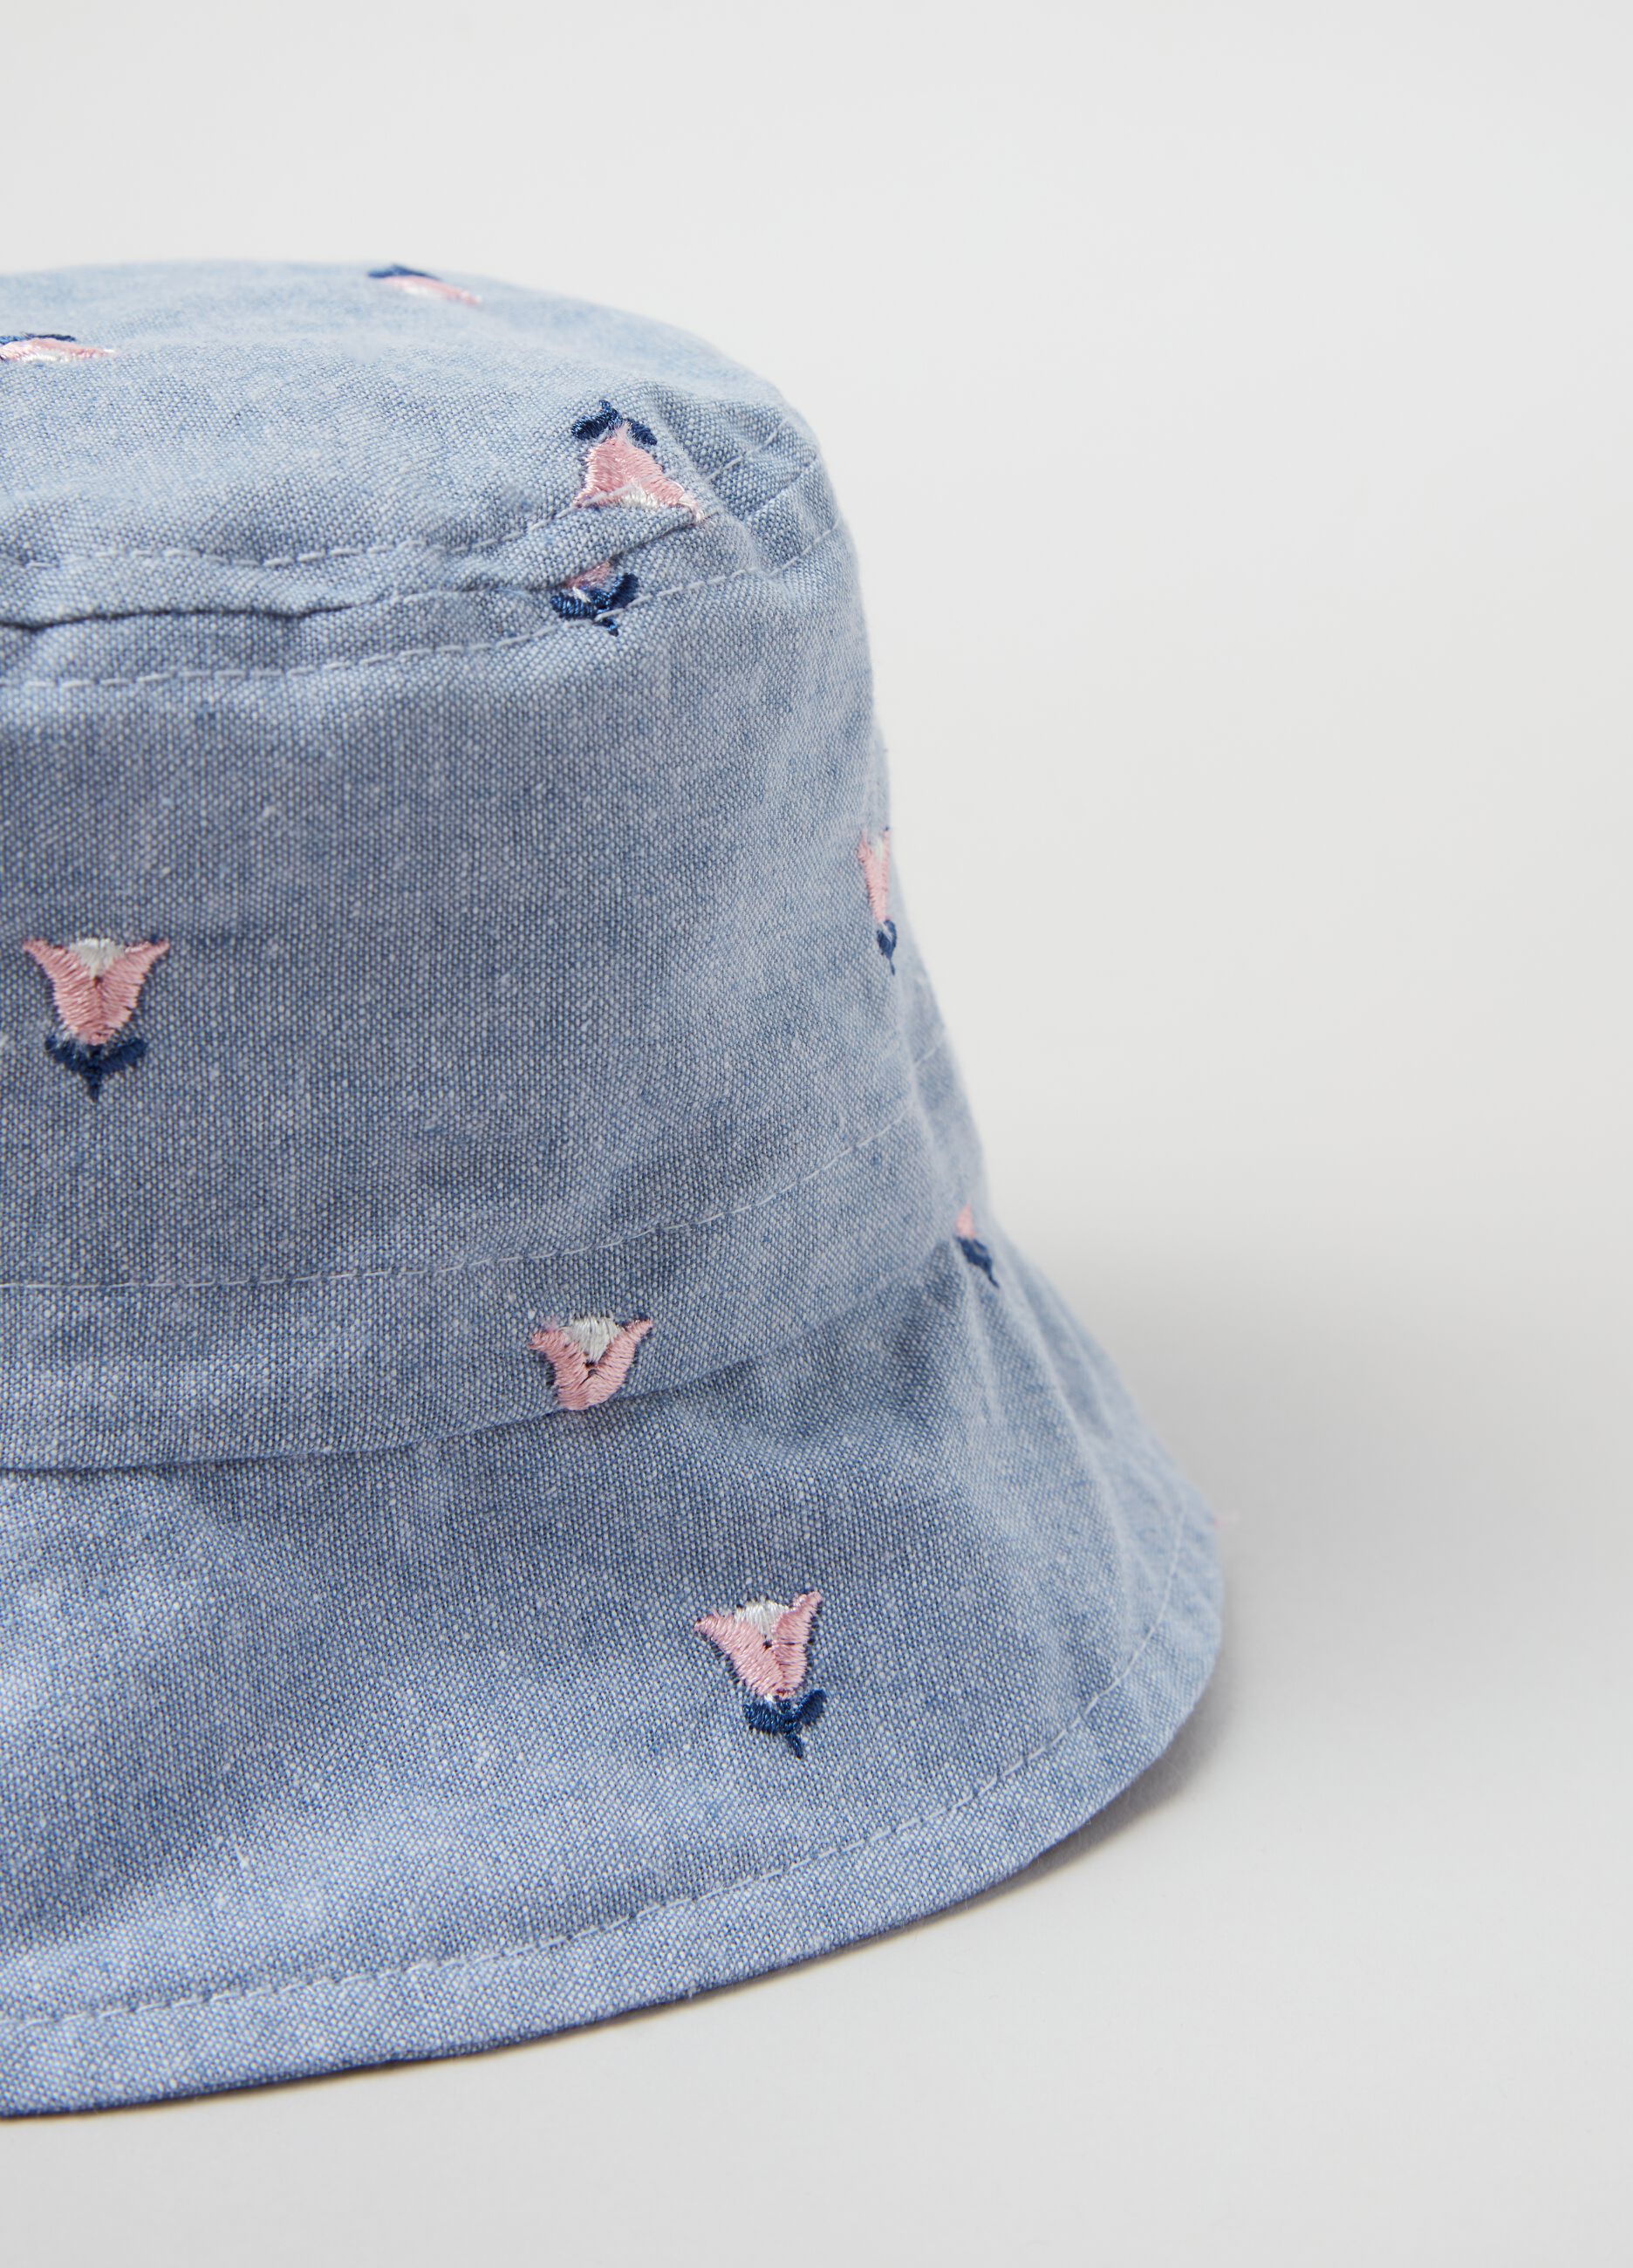 Denim hat with small flowers embroidery